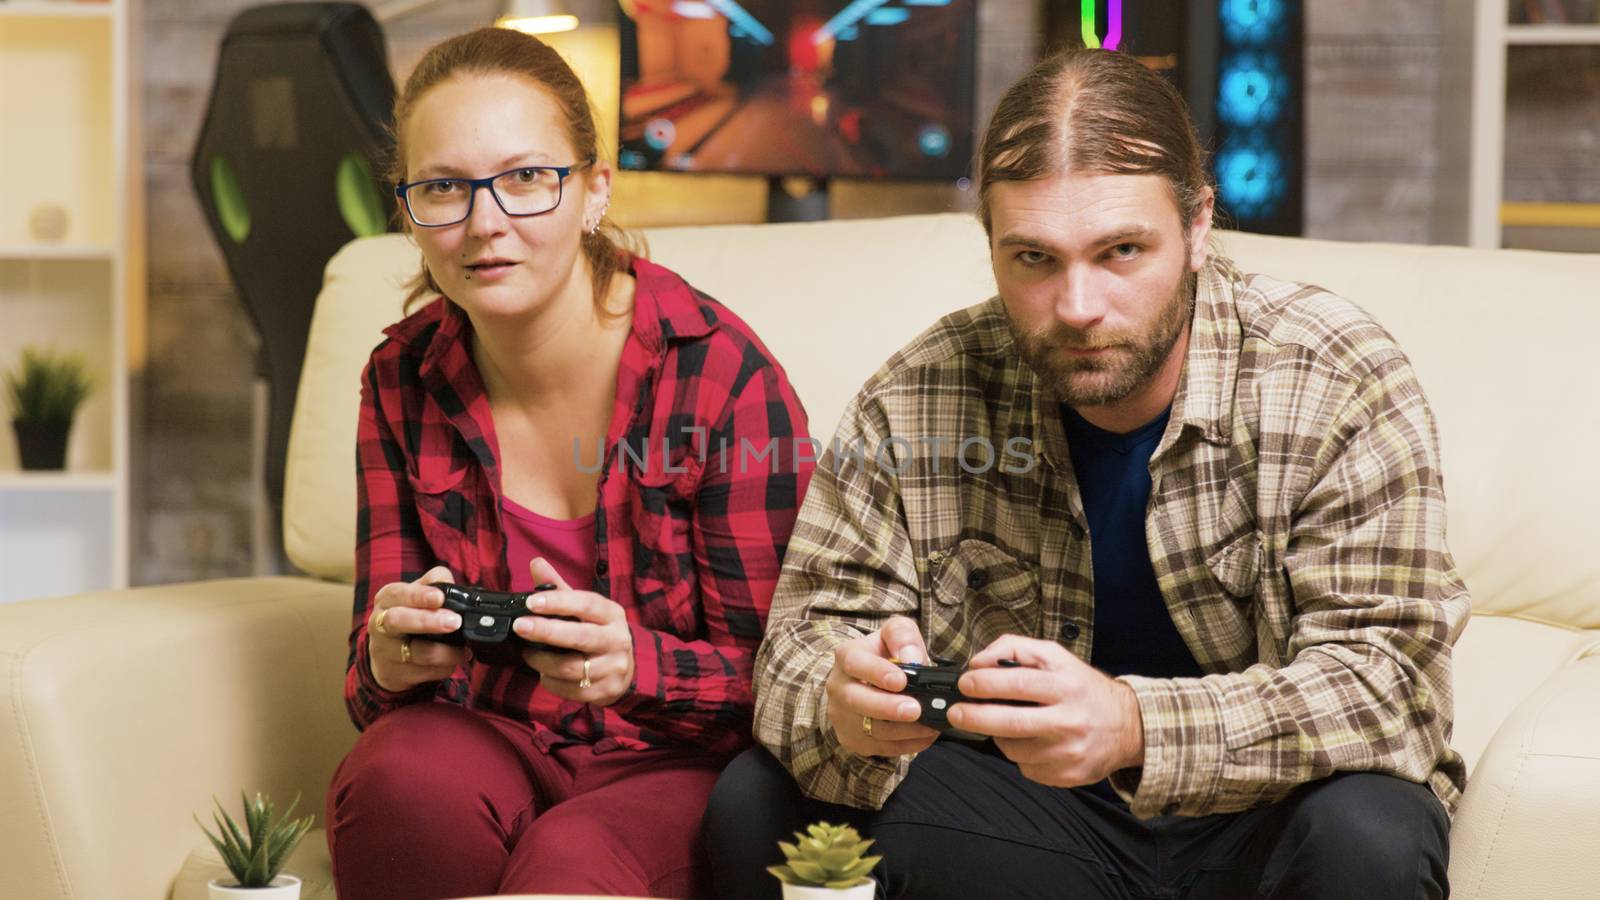 Focused couple playing online video games sitting on couch in living room. Playing games using wireless controllers.